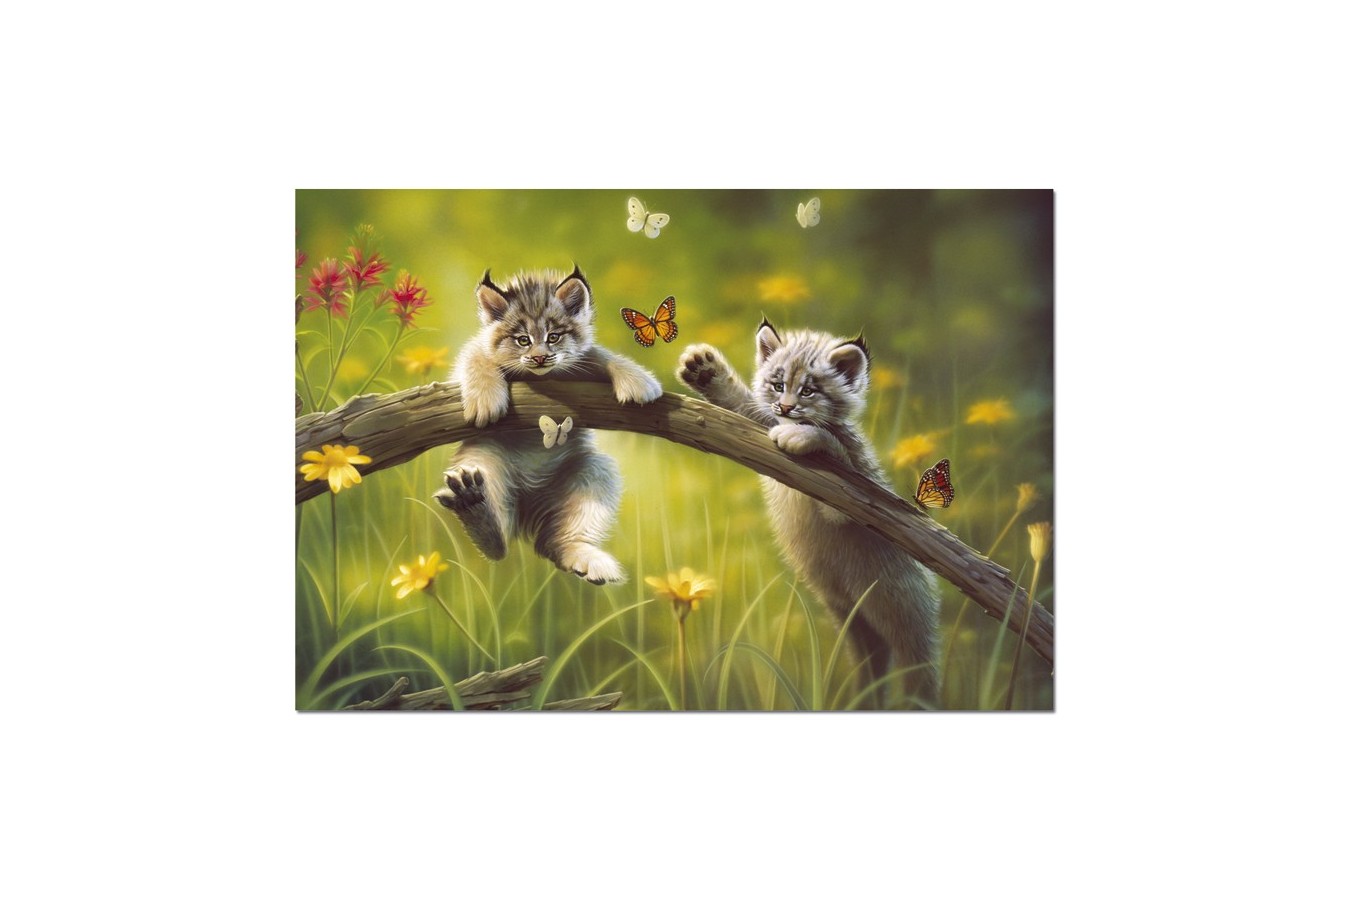 Puzzle Educa - Baby Lynxes, 500 piese, include lipici puzzle (13413)